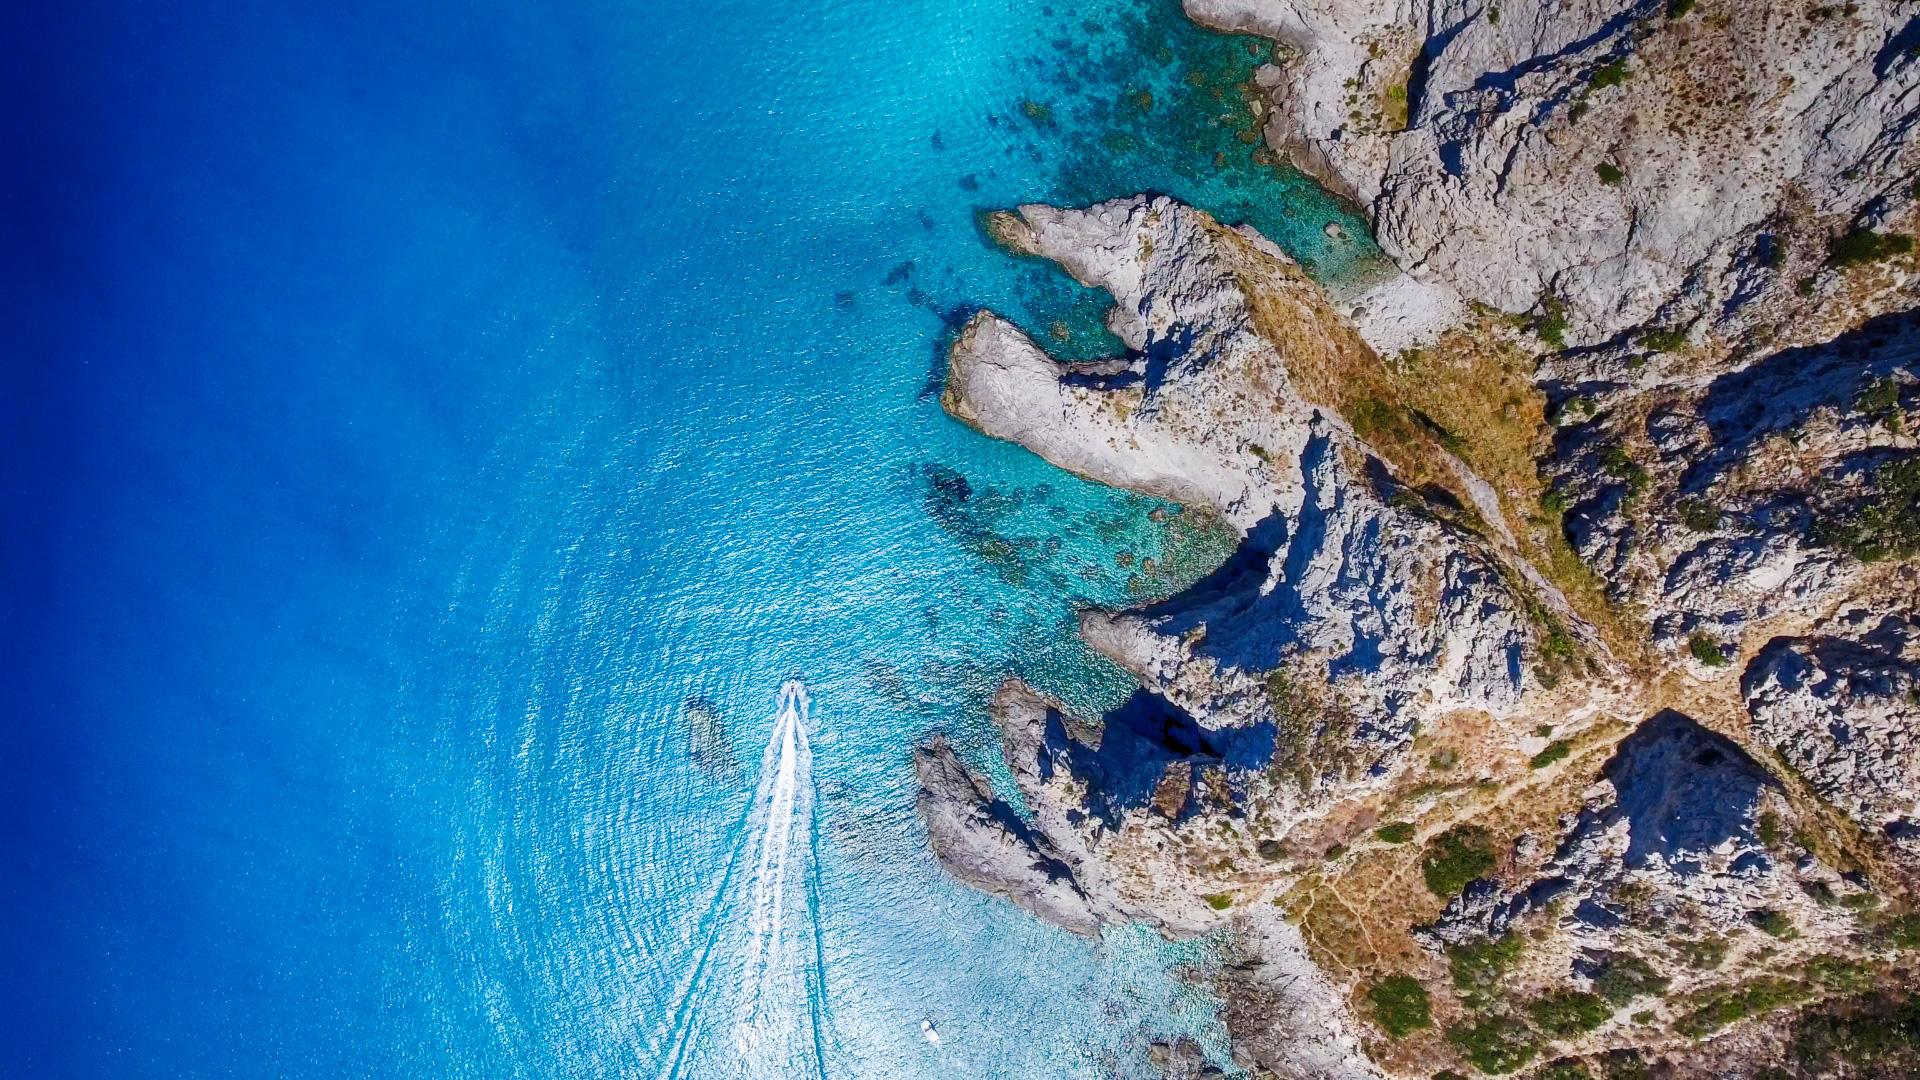 Aerial view of a boat sailing in clear waters near rocky cliffs.